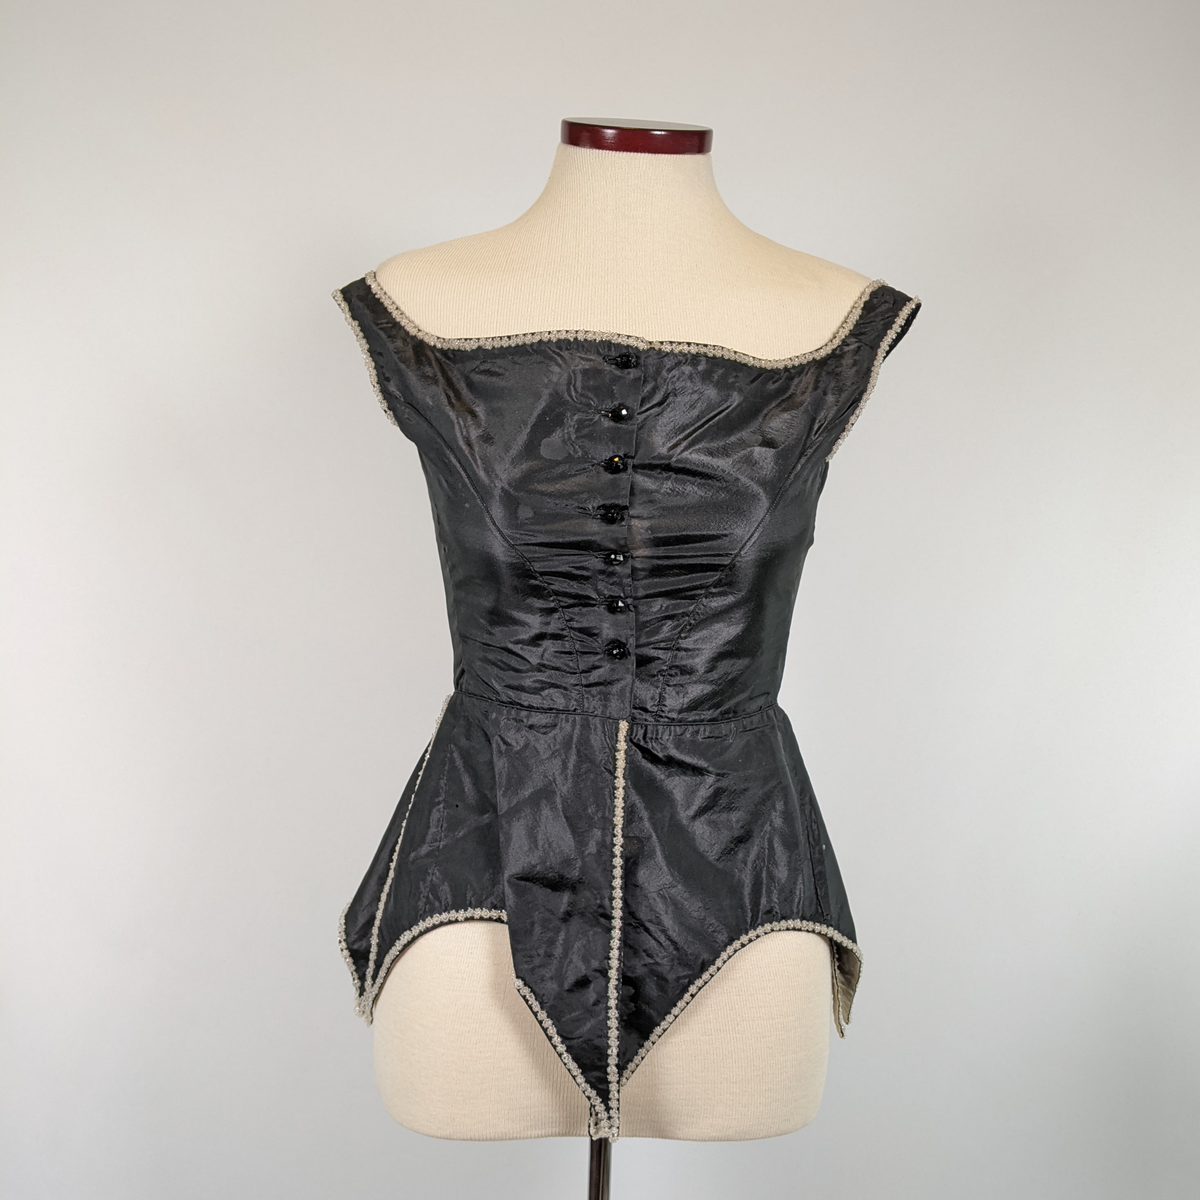 Swiss waist, waist cincher, corset, and corselet: what's the difference? -  The Dreamstress